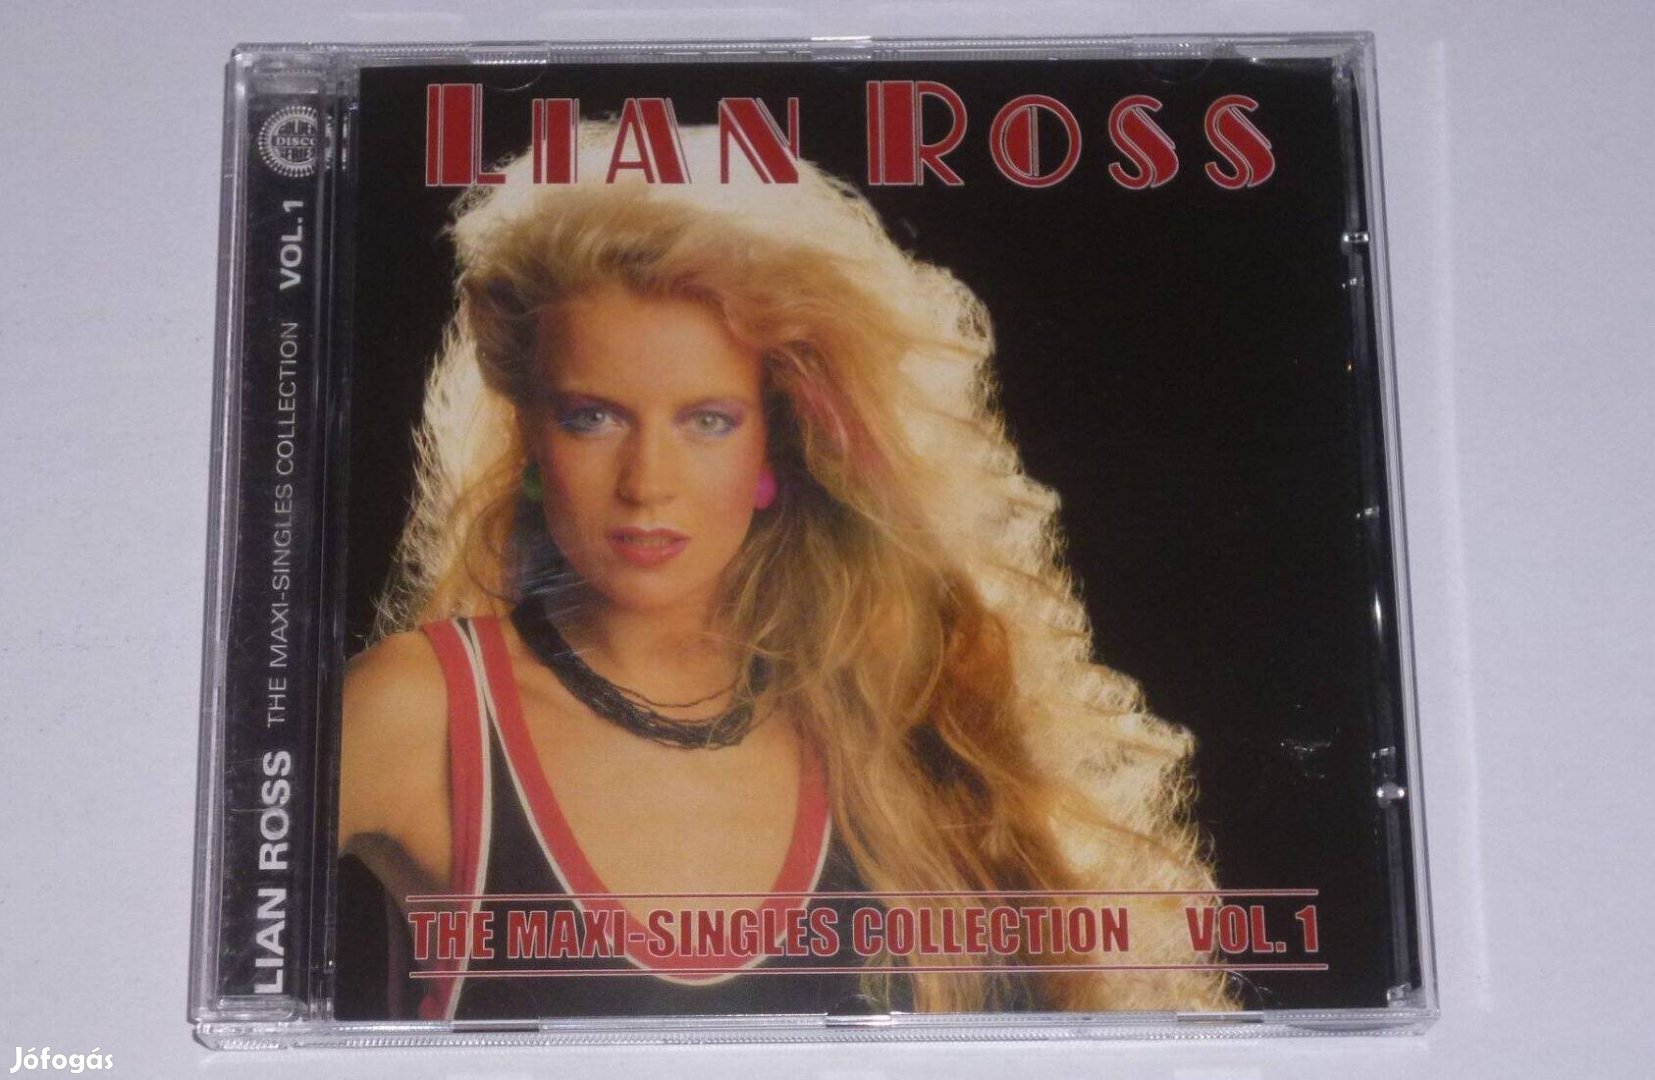 Lian Ross - The Maxi Singles Collection Vol 1 CD